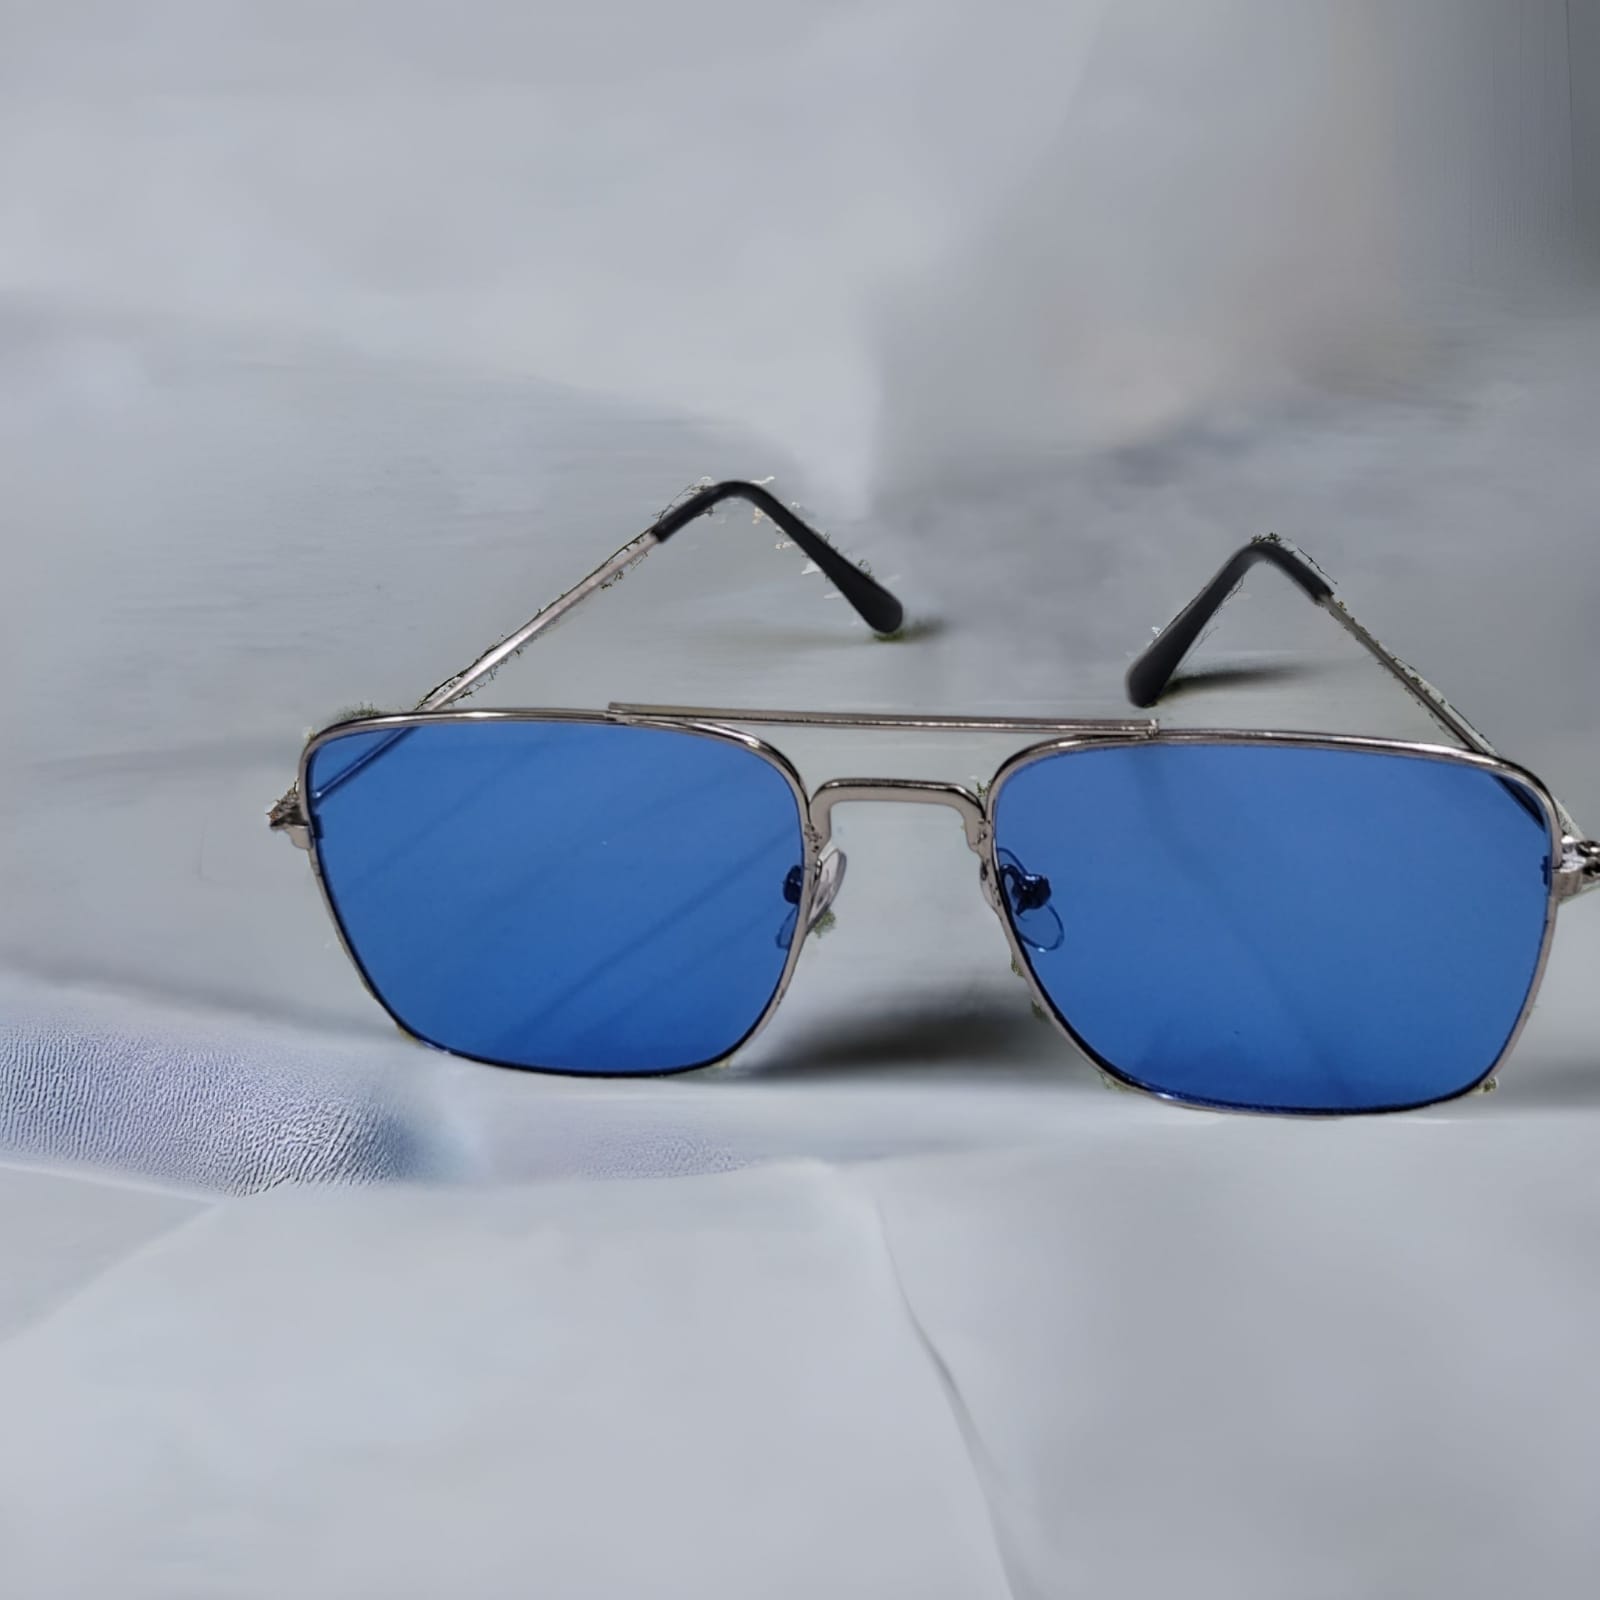  Metal Sunglasses/ Goggles With Silver Frame For Men  And Women |Unisex Specs